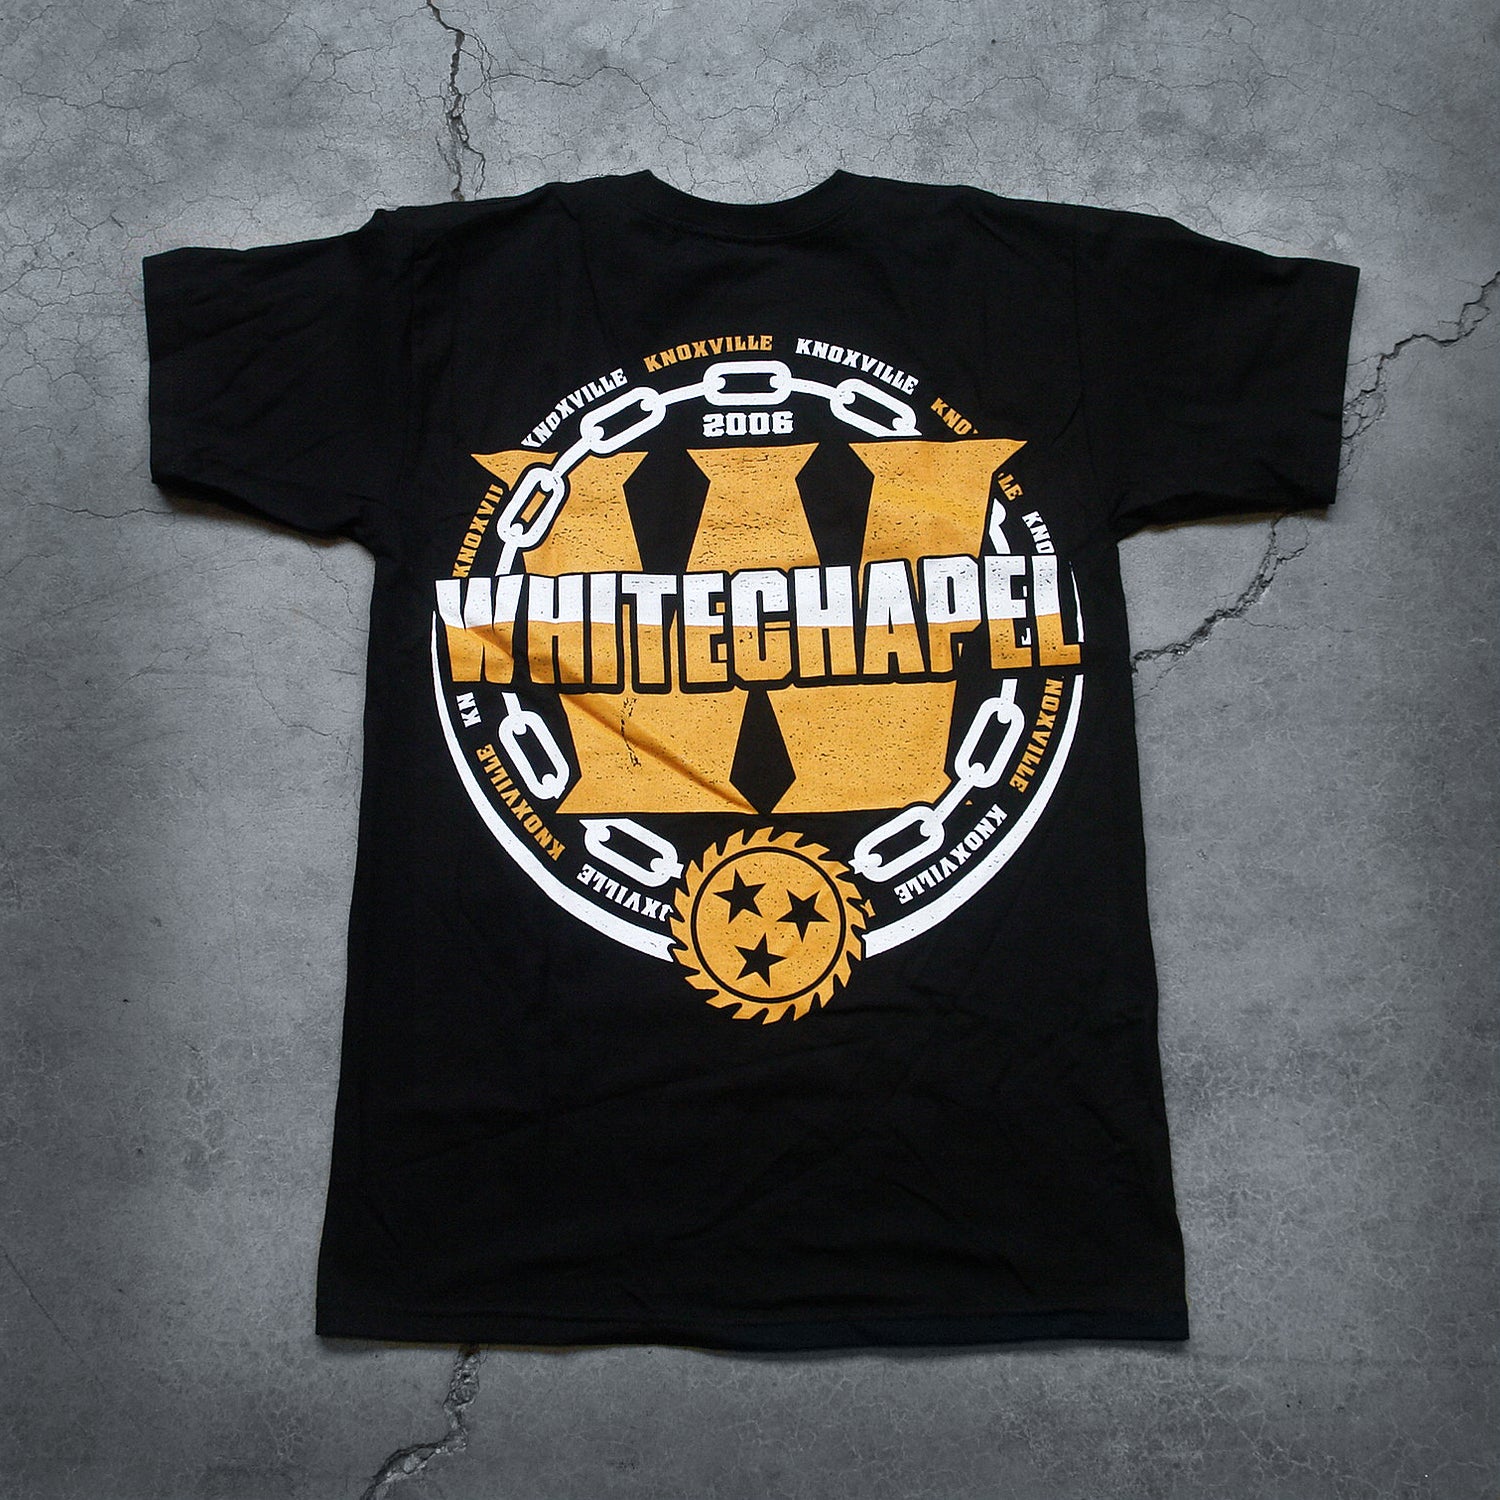 Image of the back of a black tshirt against a grey concrete background. There is a large yellow W in the center of the shirt, and the word "whitechapel" is written across it in a white to yellow gradient. surrounding this is a white chain, and the words knoxville repeatedly in alternating yellow and white colors. There is a yellow sawblade with three black stars in the center of the sawblade just under the large W.